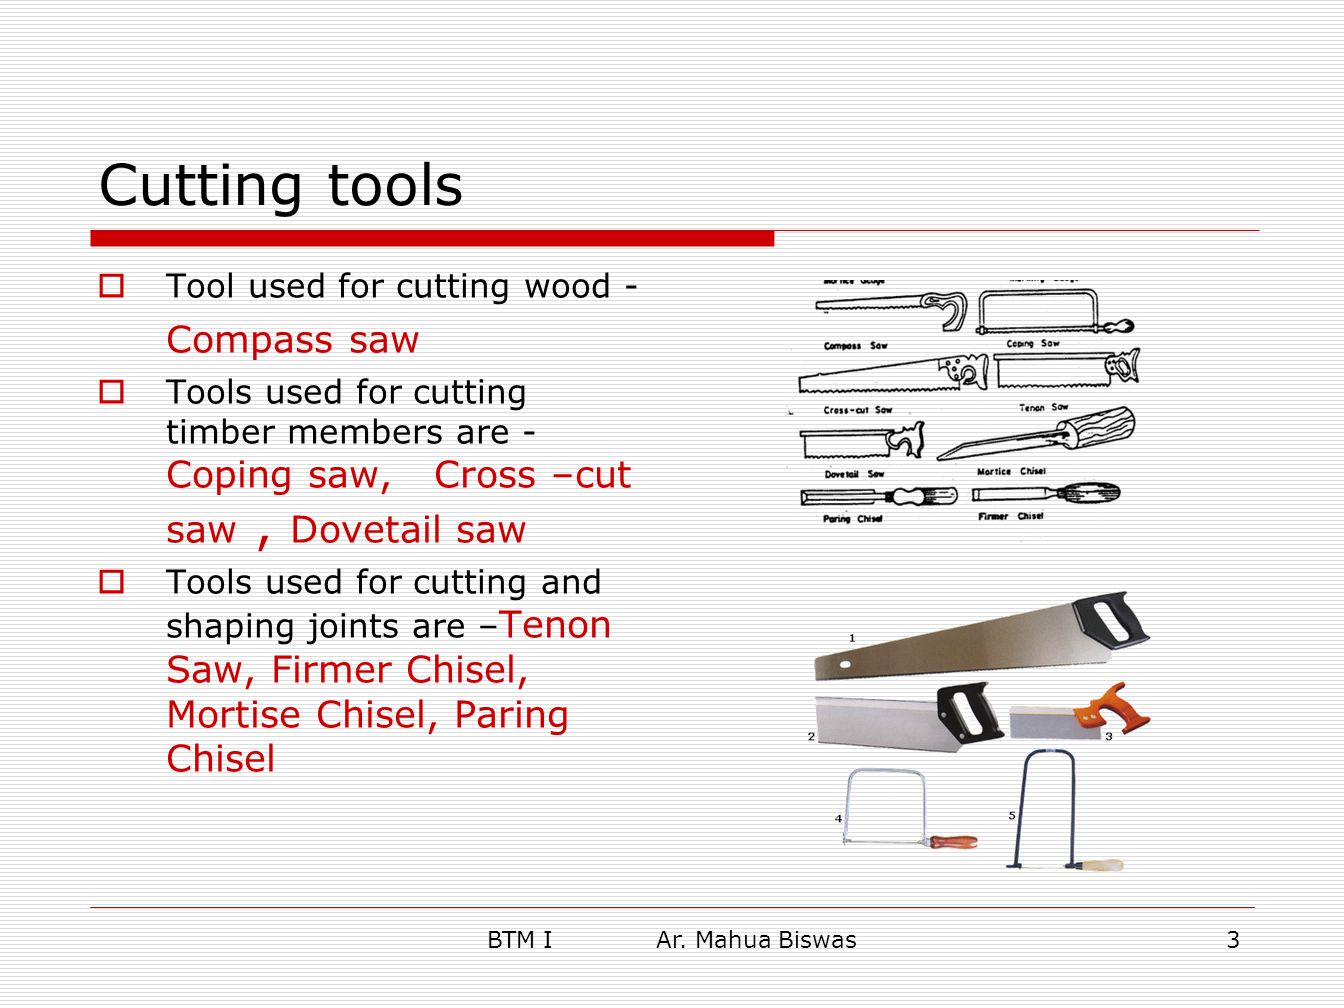 Btm I Ar Mahua Biswas1 Carpentry Tools Classification Of Carpentry Tools 1 Marking And Setting Out 2 Cutting 3 Boring 4 Planing Tools 5 Hammers And Ppt Download